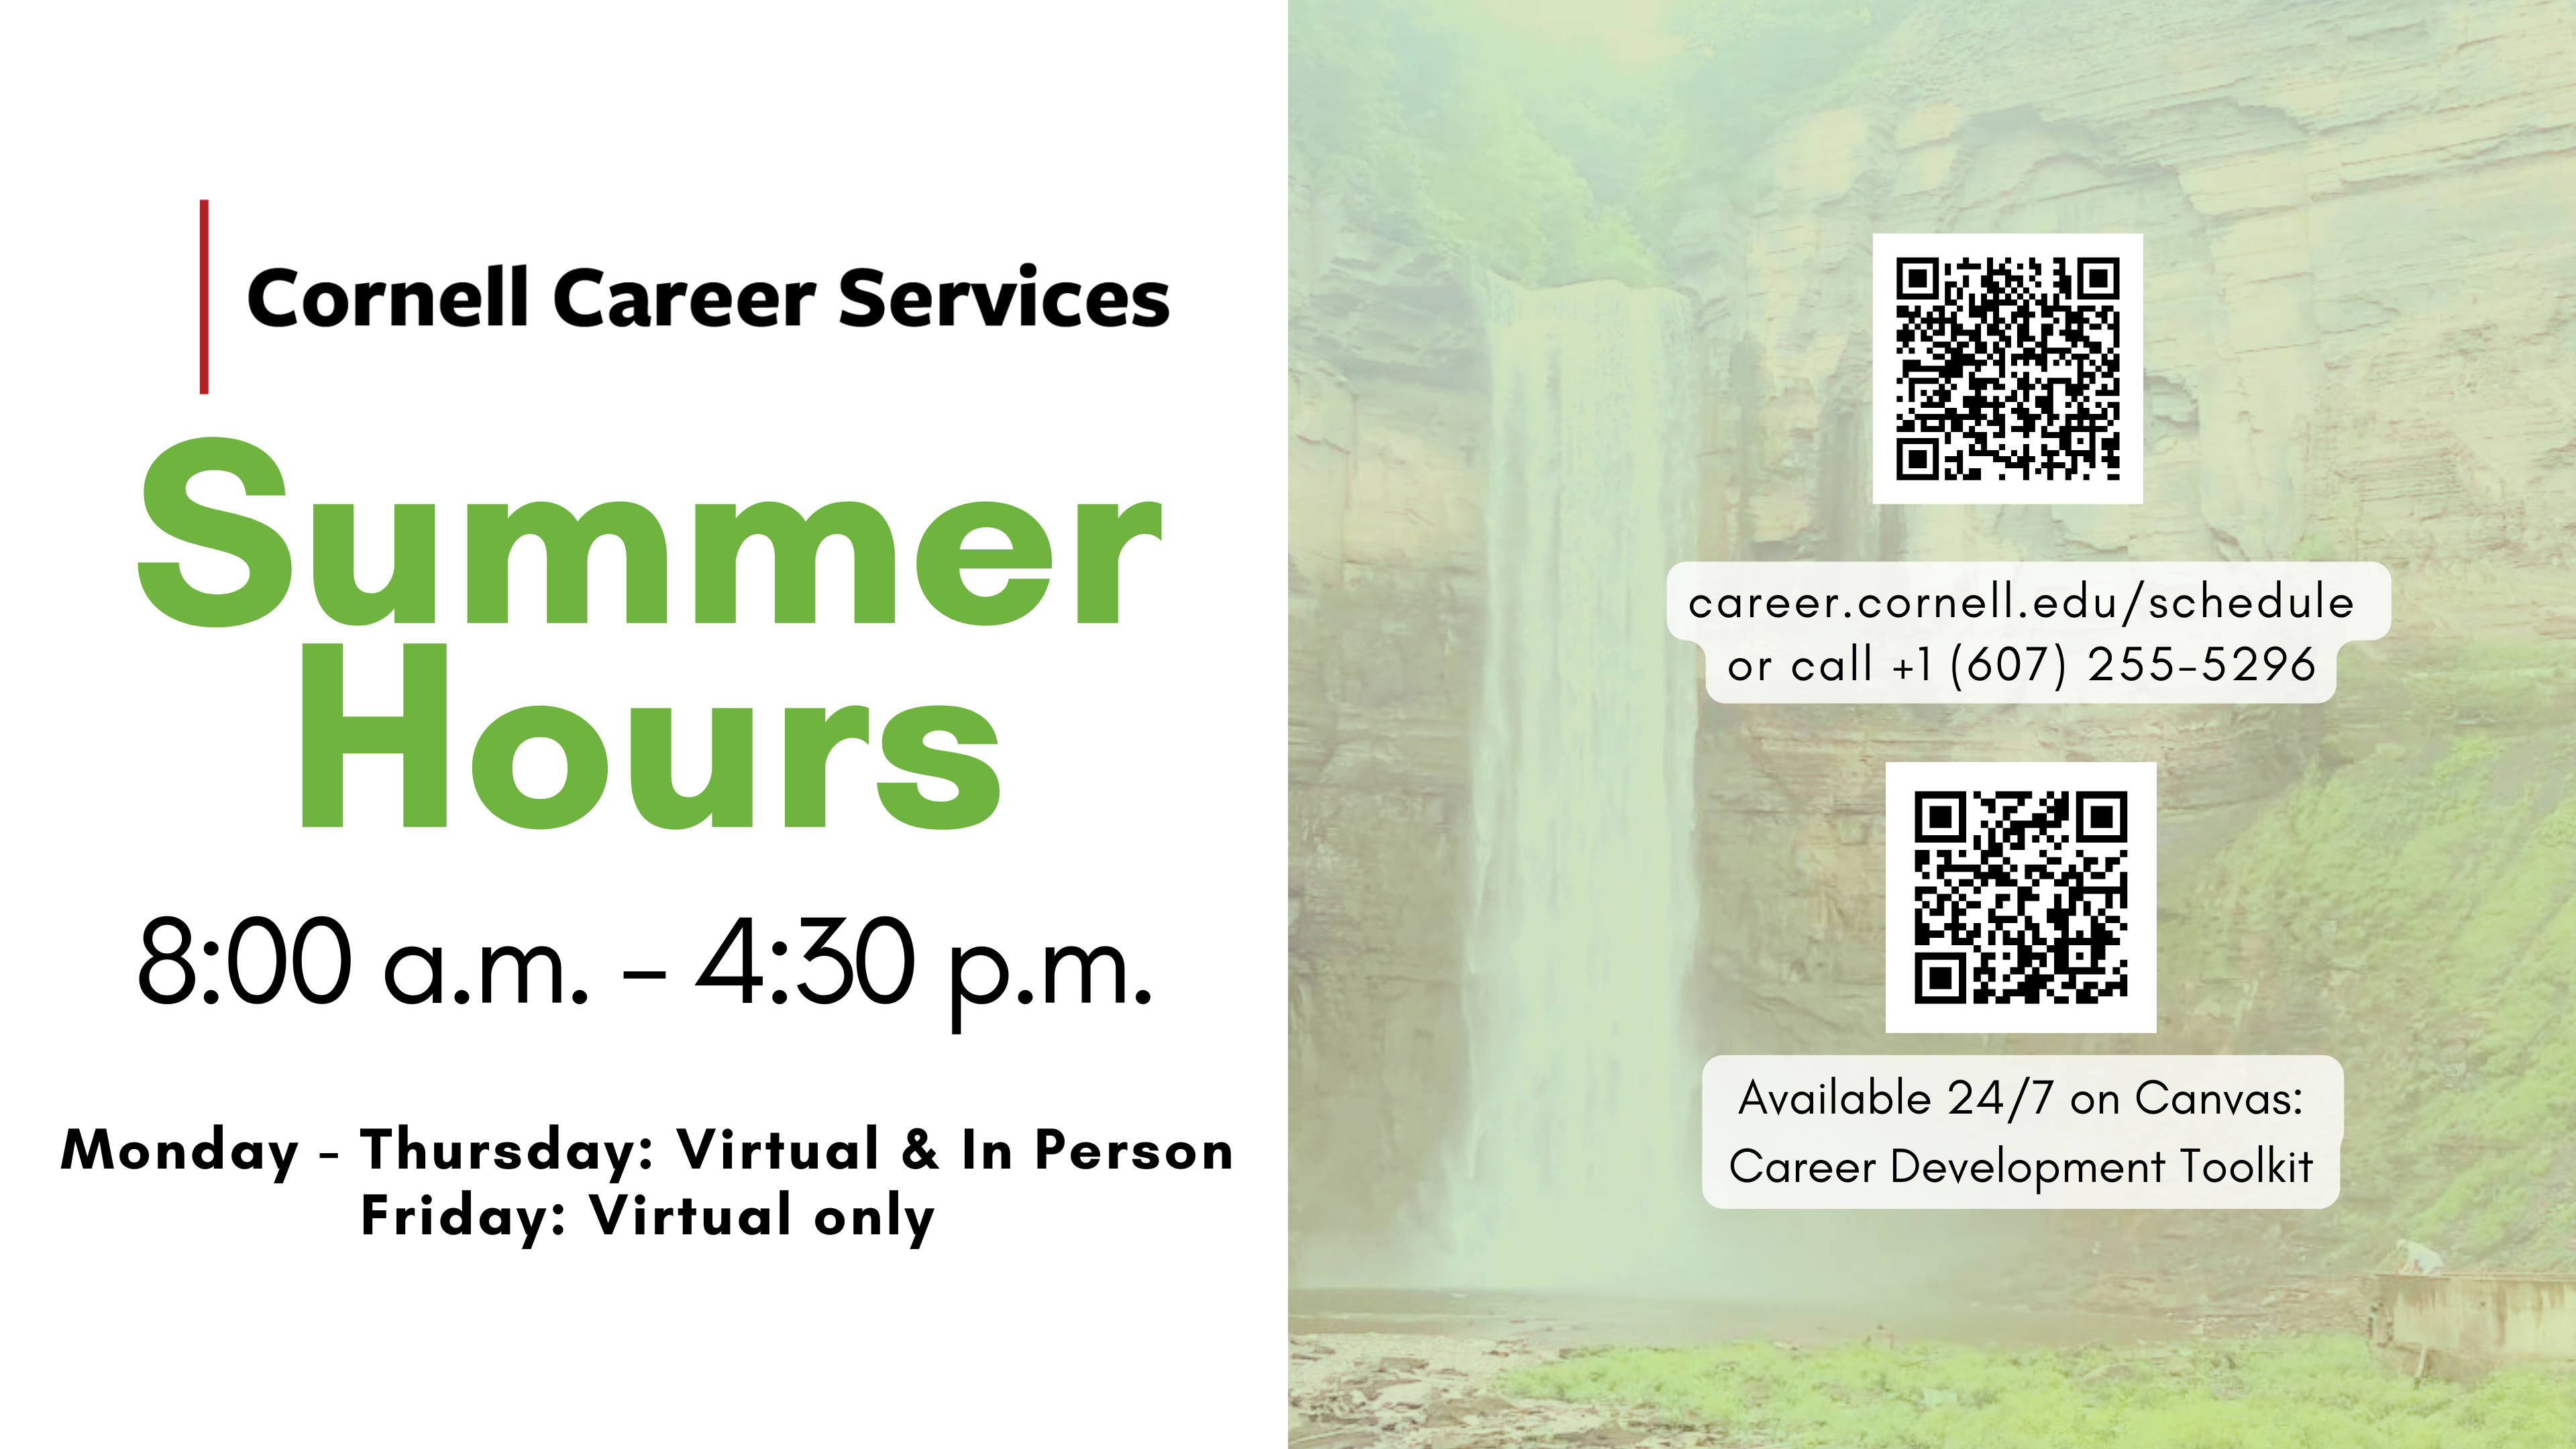 Summer Hours 8 to 4:30 Monday - Thursday, Friday Virtual only